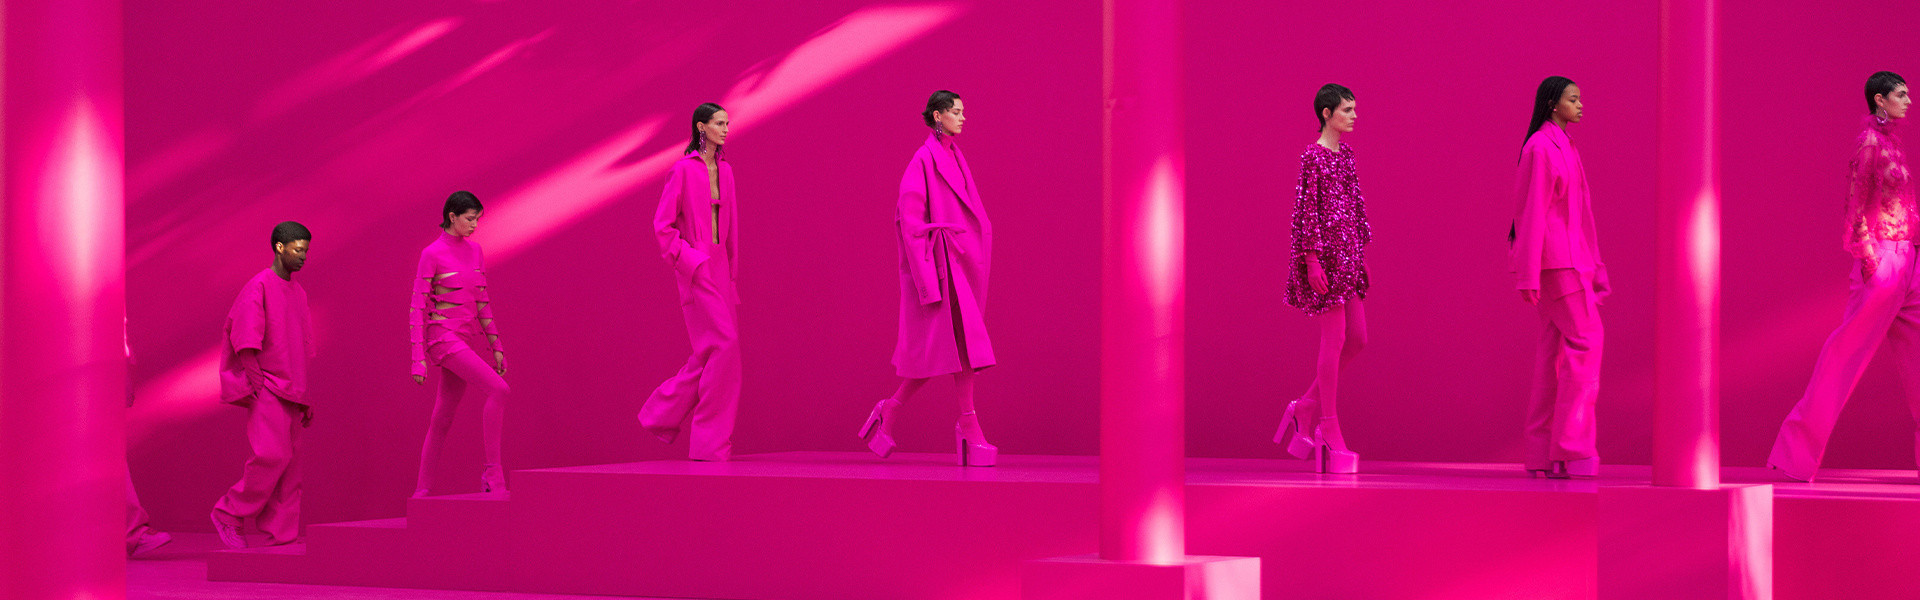 Valentino_Pink_PP_Intro_PP_with_Video_Full_Show_Credits_